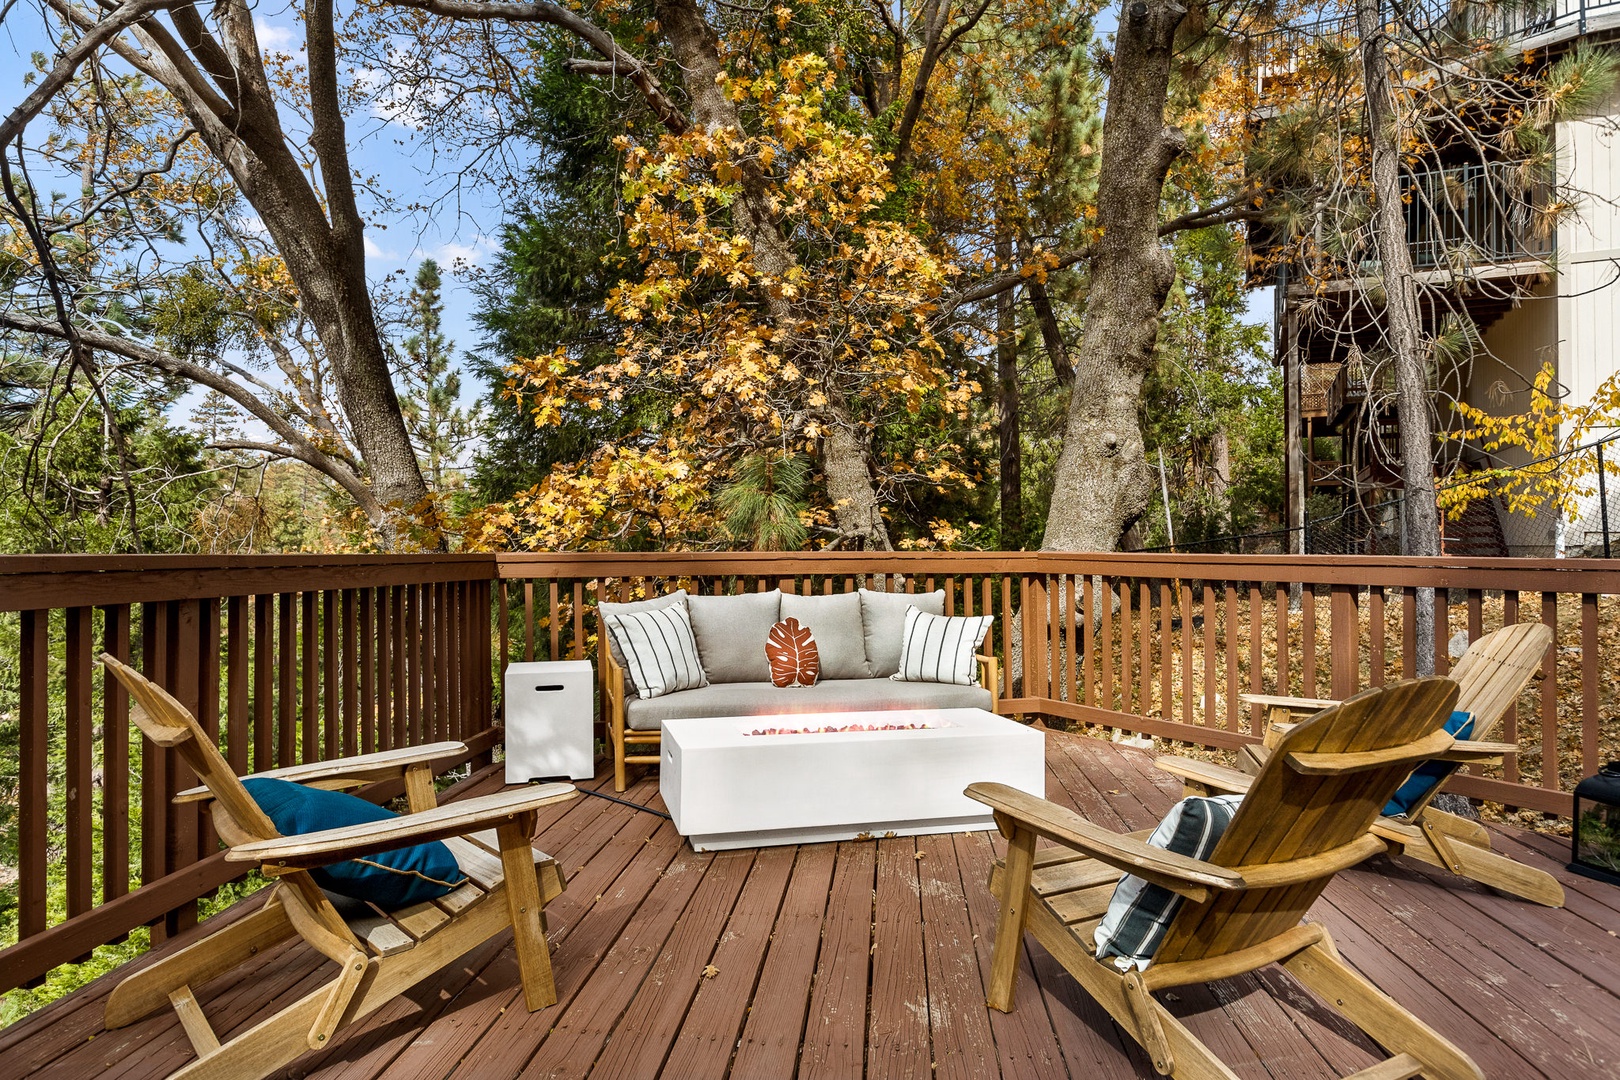 Lounge the day away with stunning views on the multi-level deck